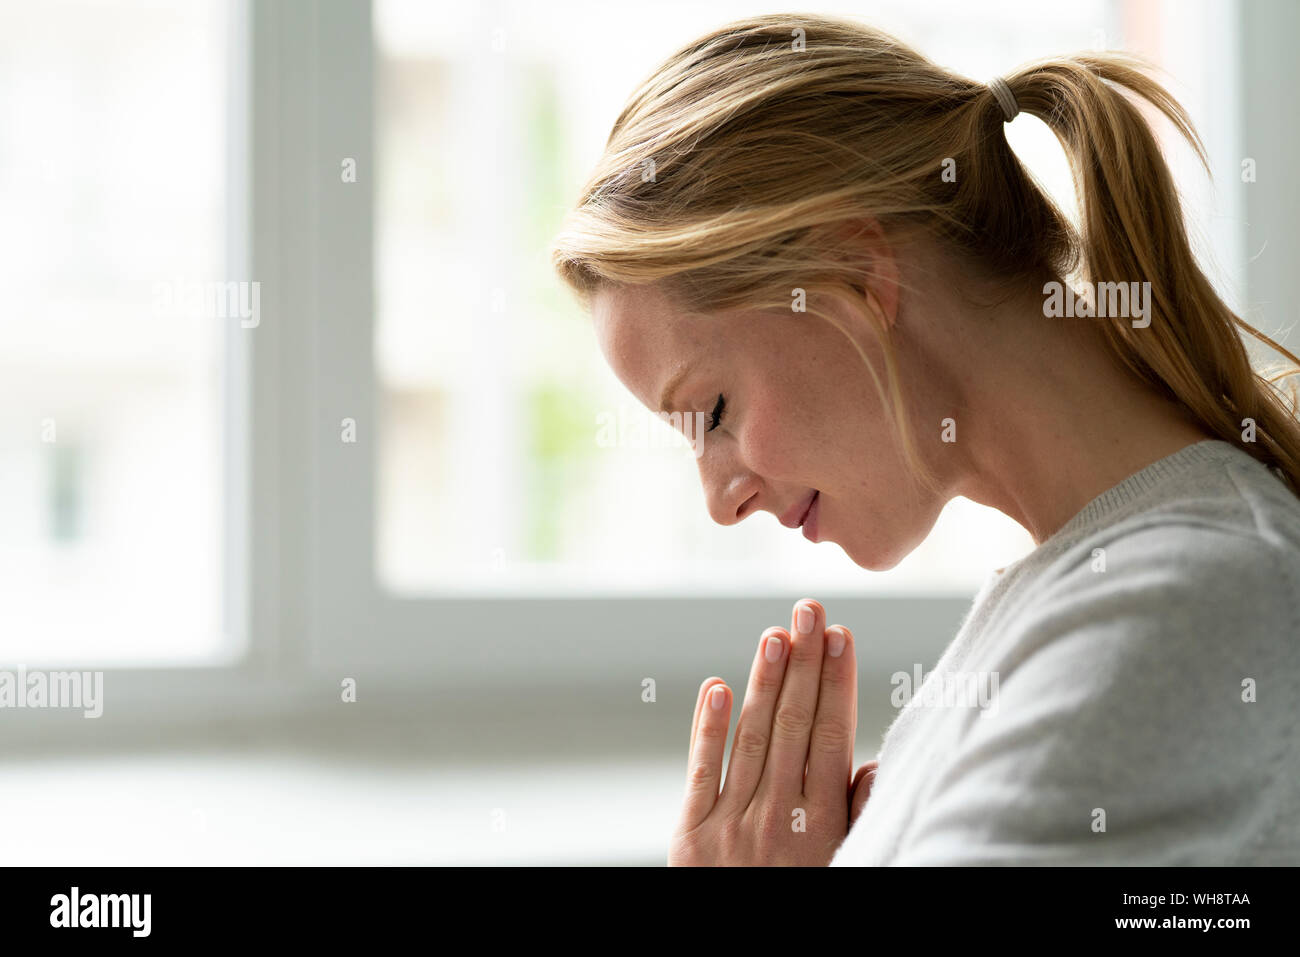 Smiling young woman with closed eyes and clasped hands Stock Photo